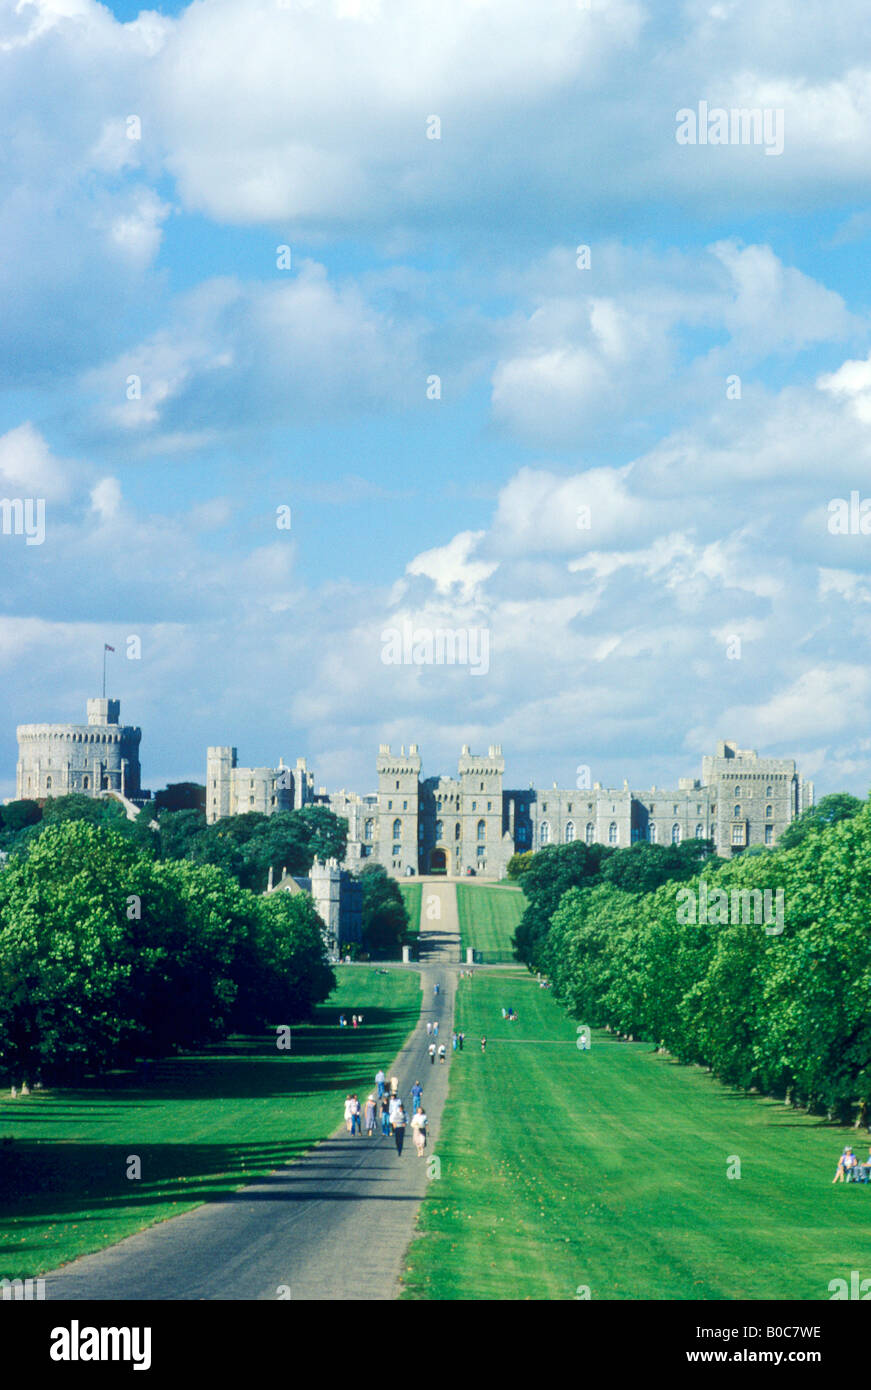 Windsor Castle The Long Walk Royal Residence Queen of England Palace Berkshire UK travel tourism tourist attraction Stock Photo